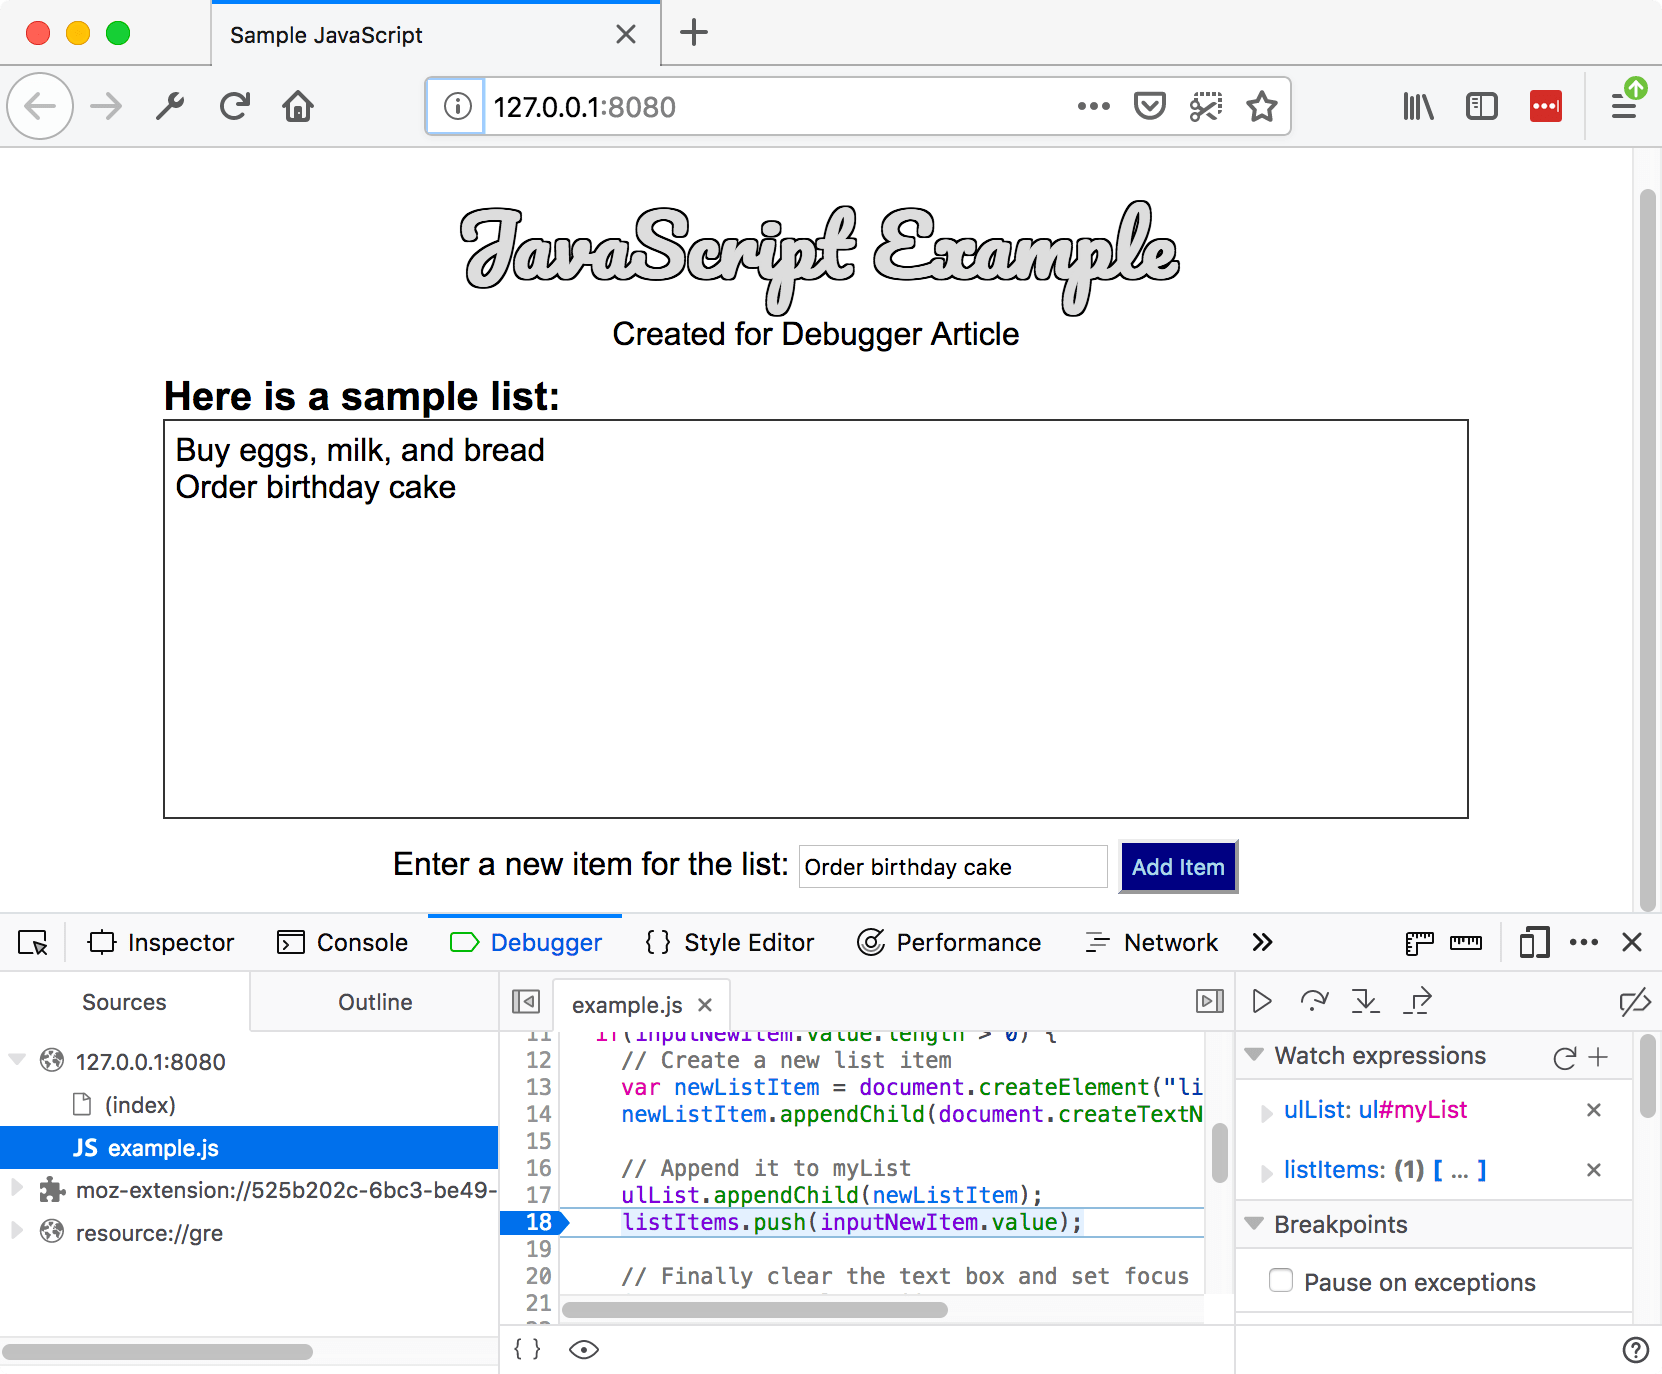 A test website that is served locally in port 8080. The developer tools sub-window is open. The JavaScript debugger tab is selected. It allows you to watch the value of variables and set breakpoints. A file with name 'example.js' is selected from the sources pane. A breakpoint is set at line number 18 of the file.